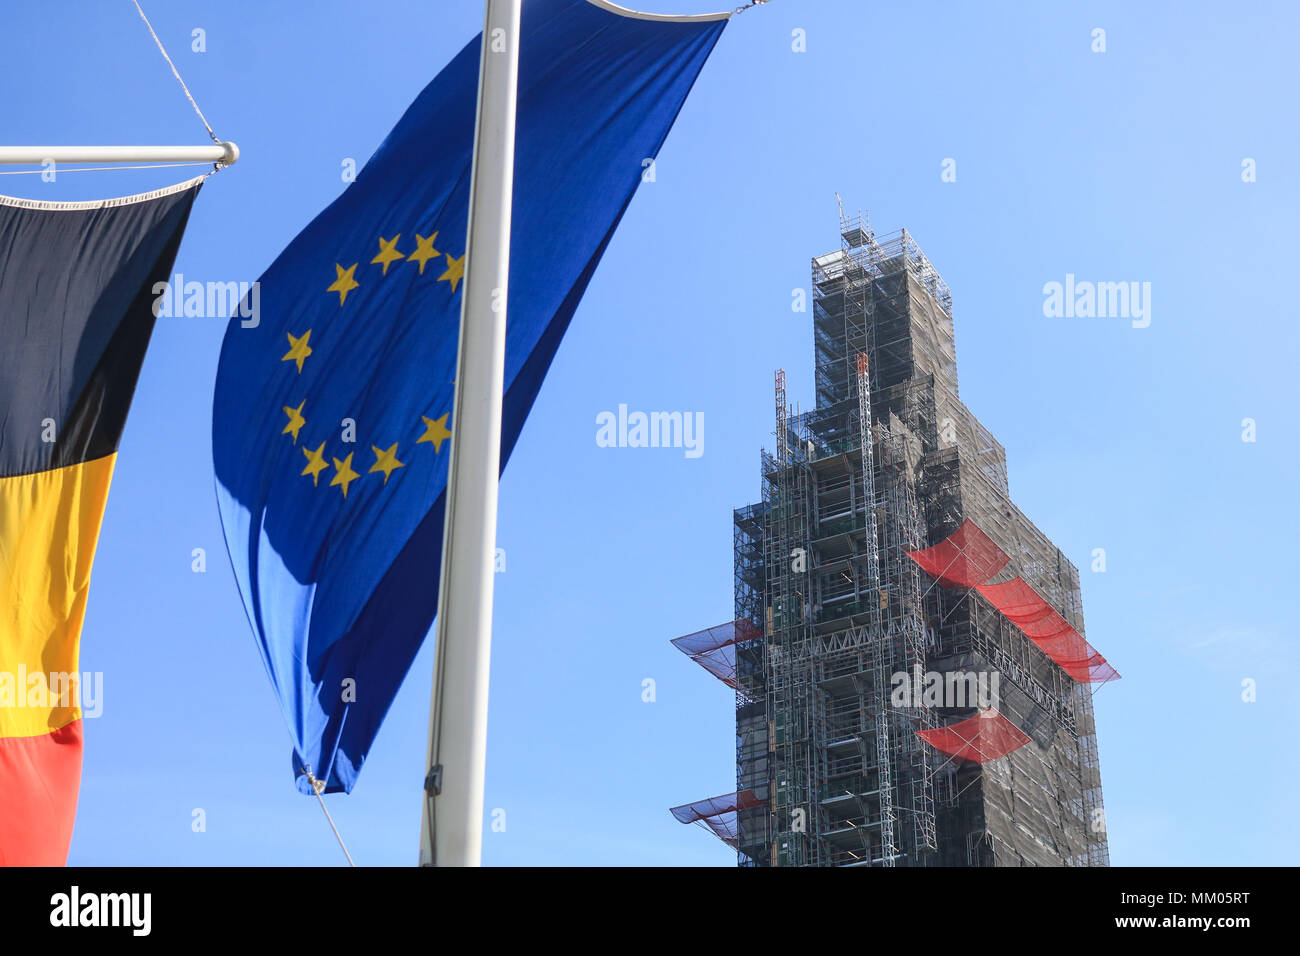 London UK. 9th May 2018. Flags of the European Union member states hang in Parliament Square to celebrate Europe Day Credit: amer ghazzal/Alamy Live News Stock Photo